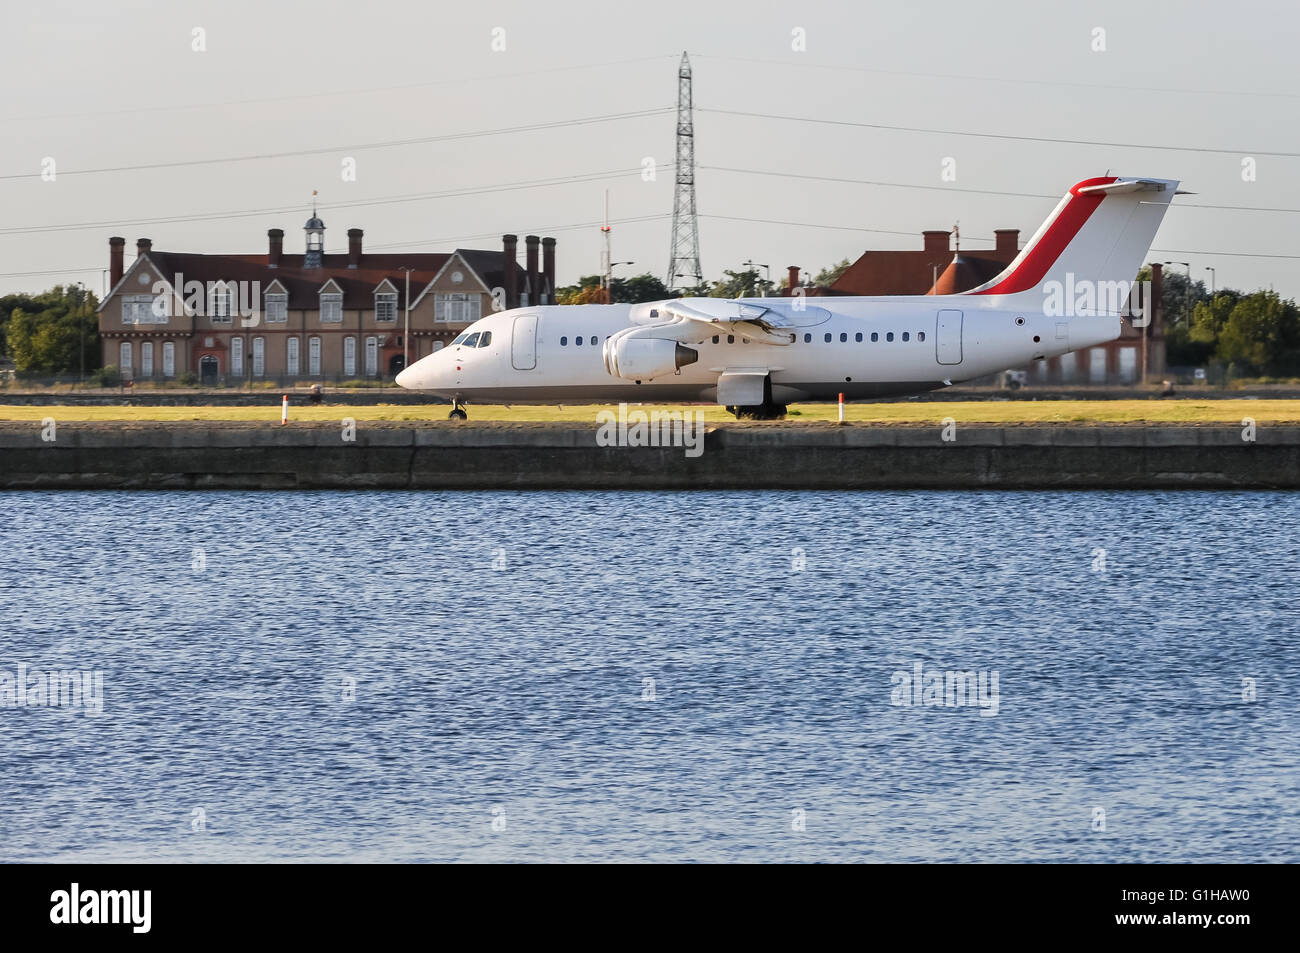 Aircraft on the London City Airport runway ready to take-off Stock Photo